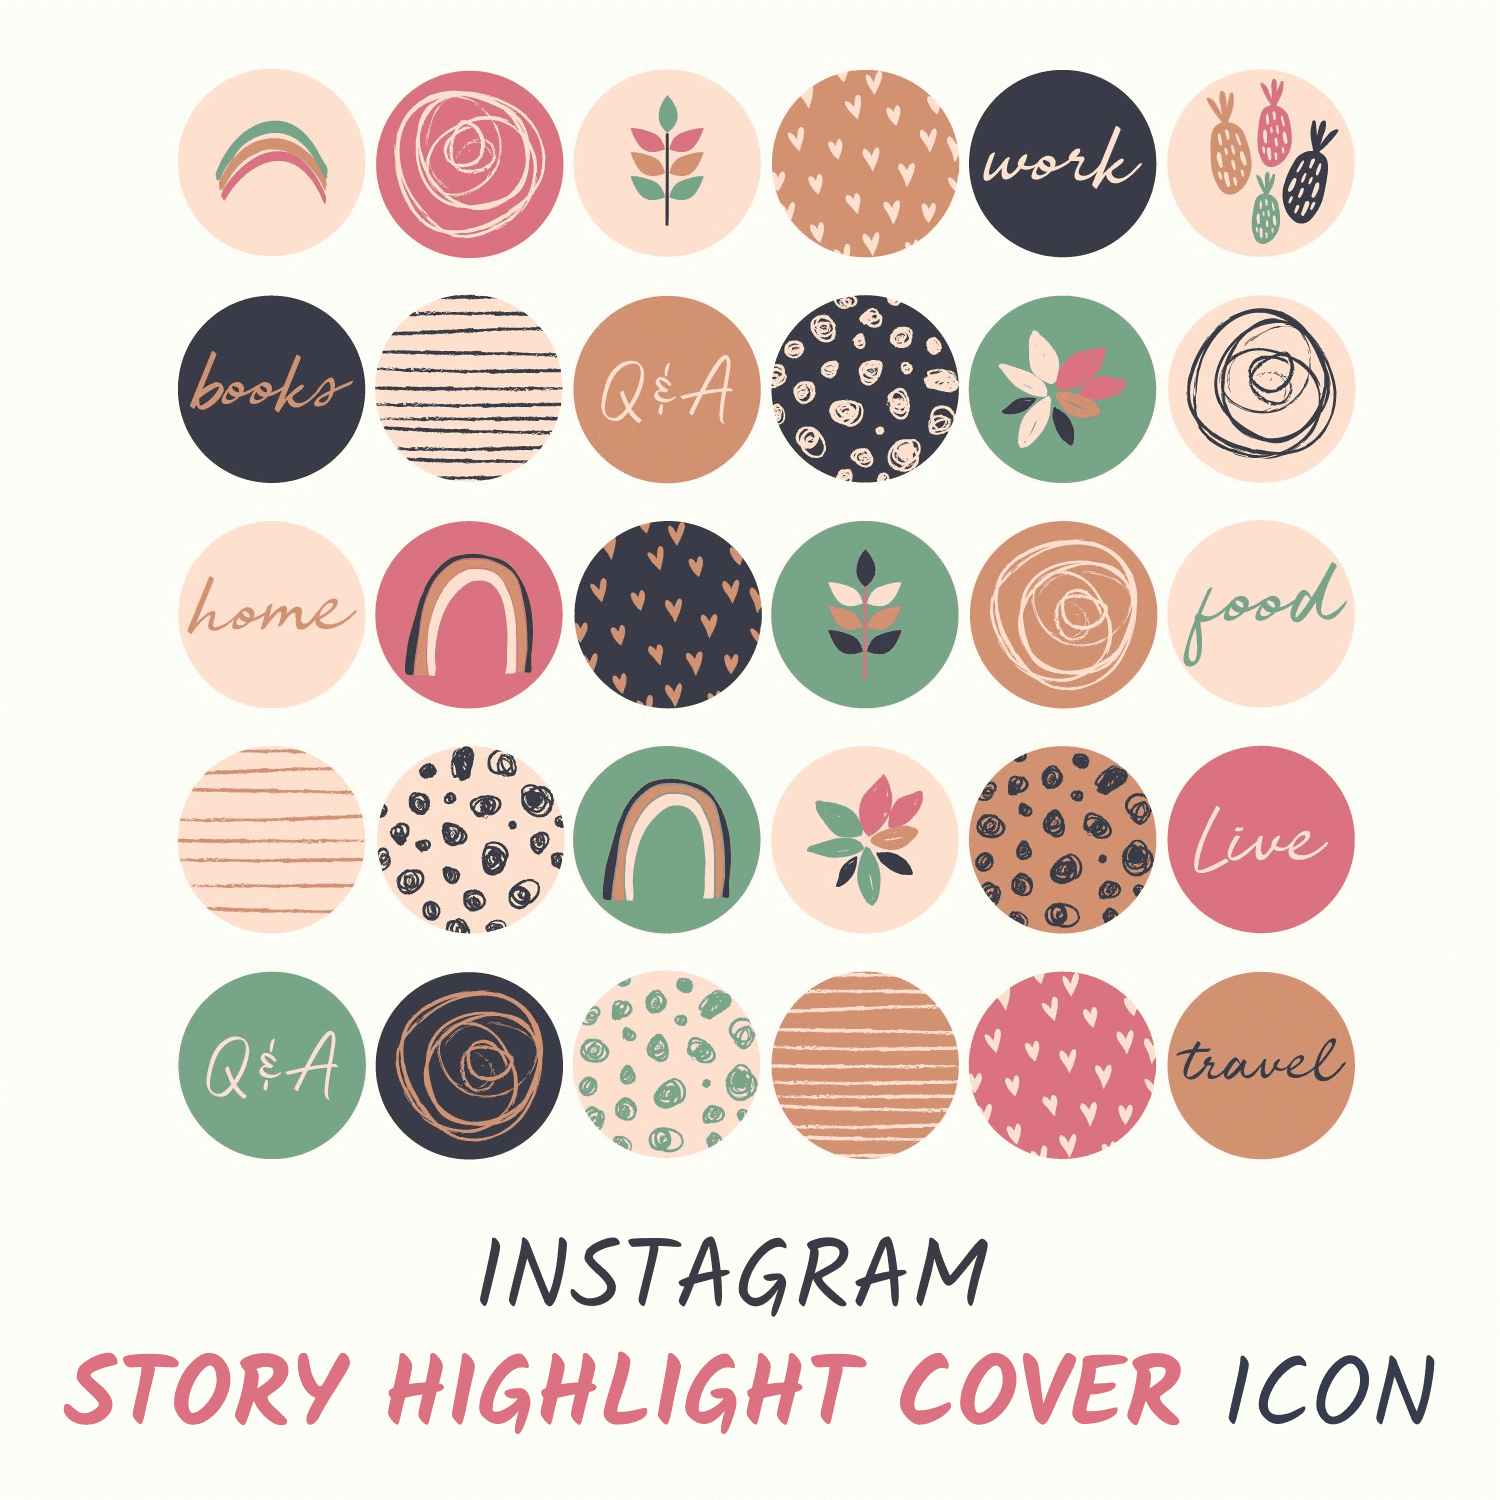 Pin by Yanieyz 🌠 on Highlight (3) | Cooking icon, Instagram highlight  icons, Instagram icons